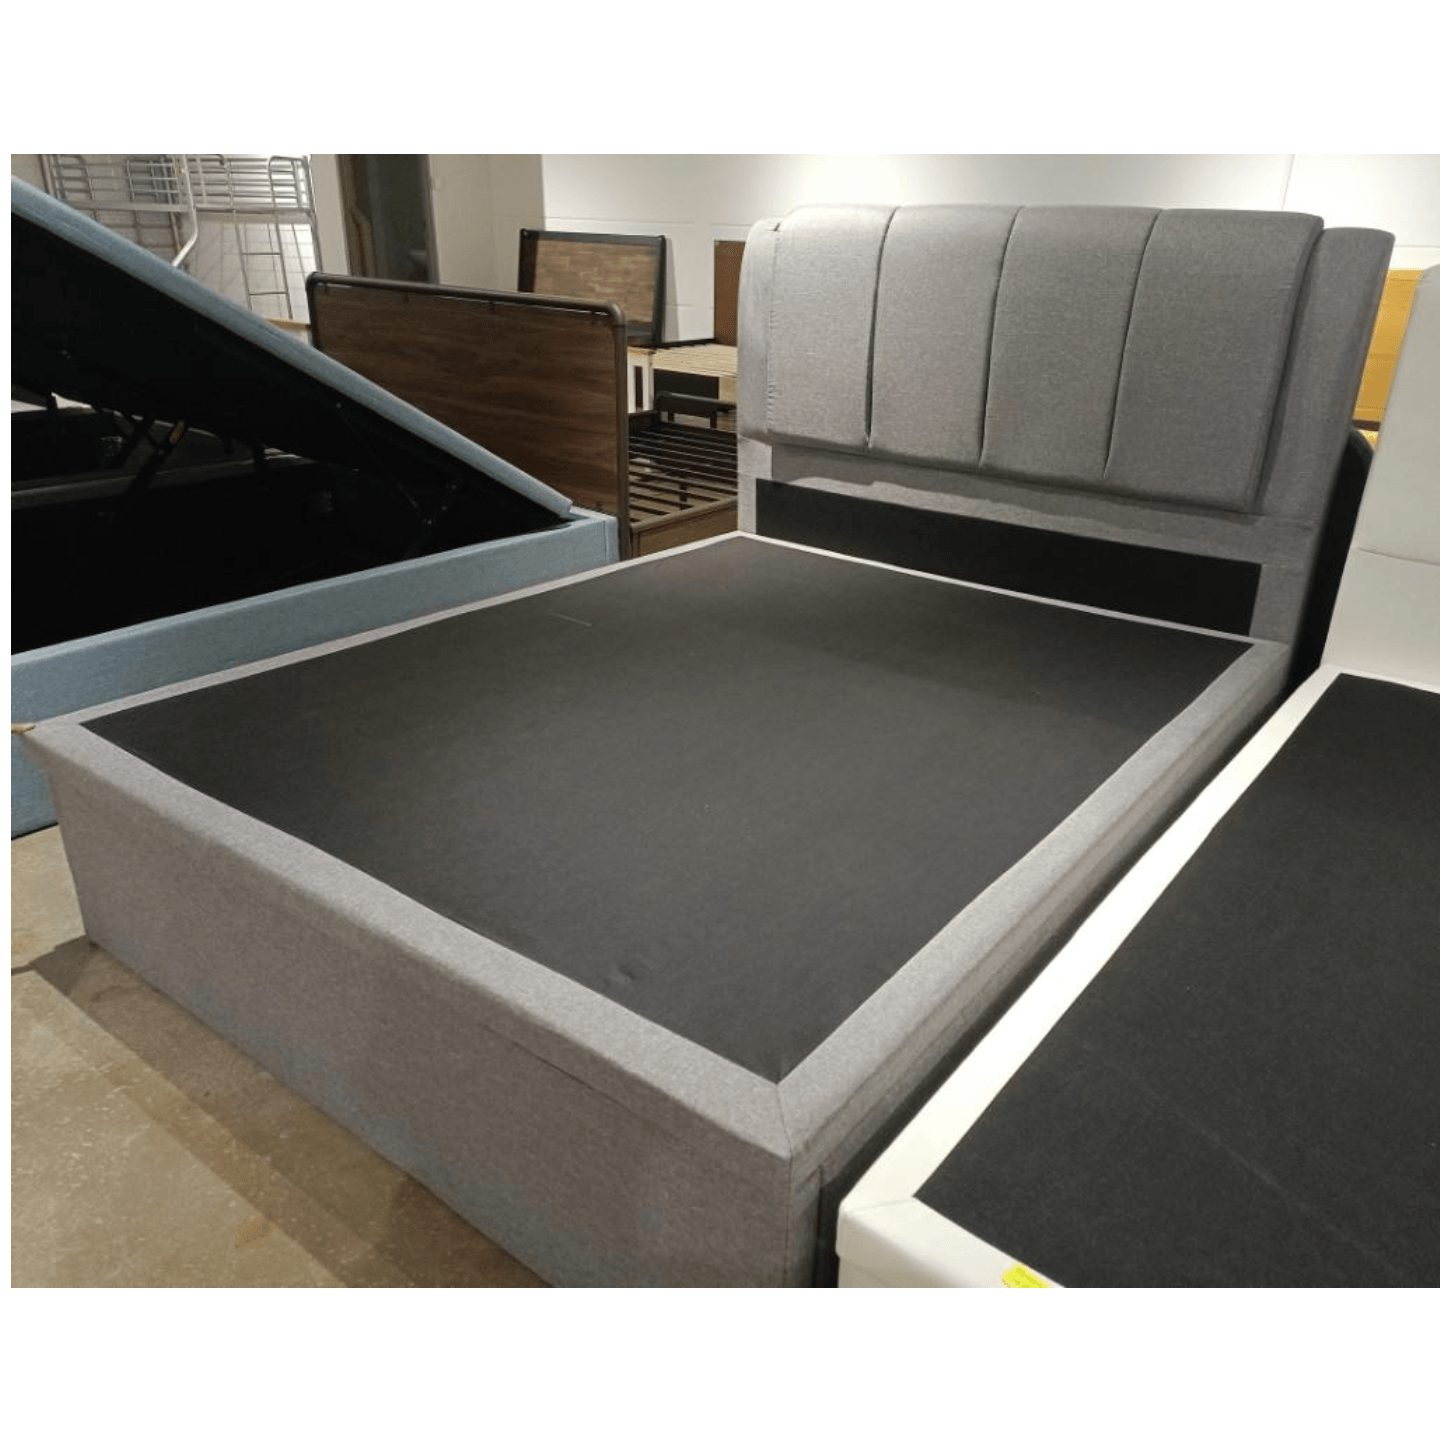 RAMONA Queen Storage Bed Frame in GREY Faux Leather